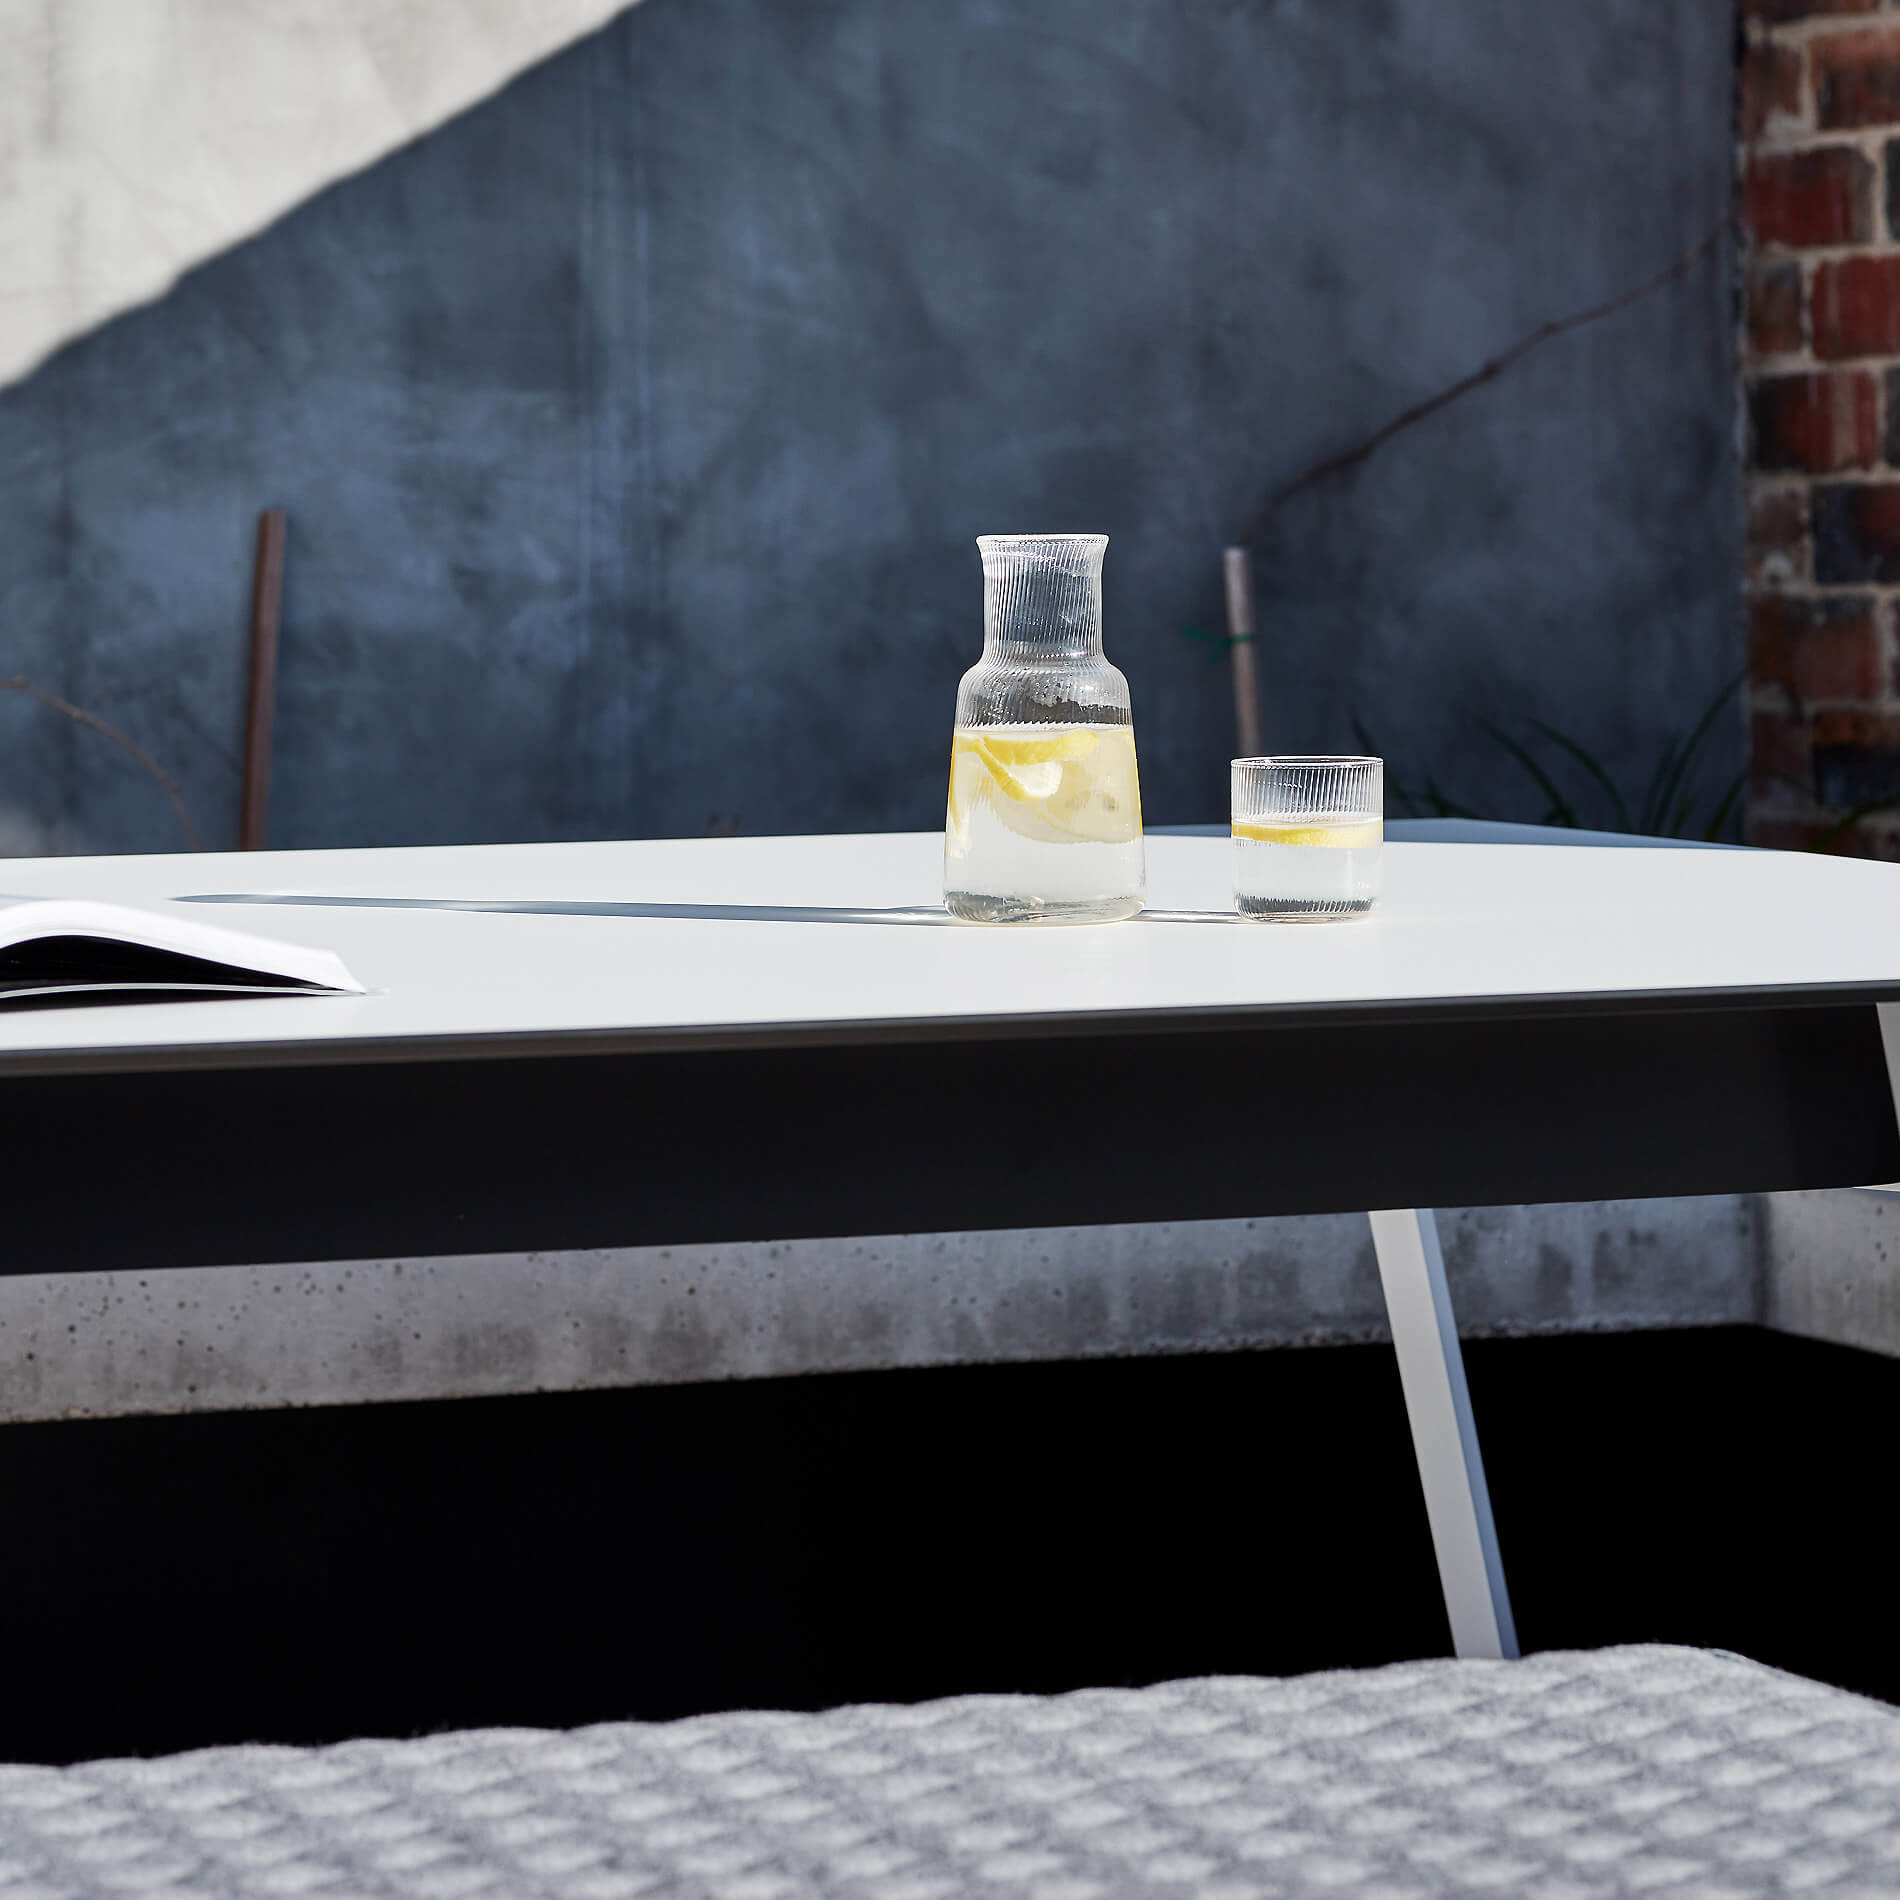 Refreshing home made lemonade greets you as you sit at this designer outdoor table by Australian designer FrancoCrea in the stunning new patio area